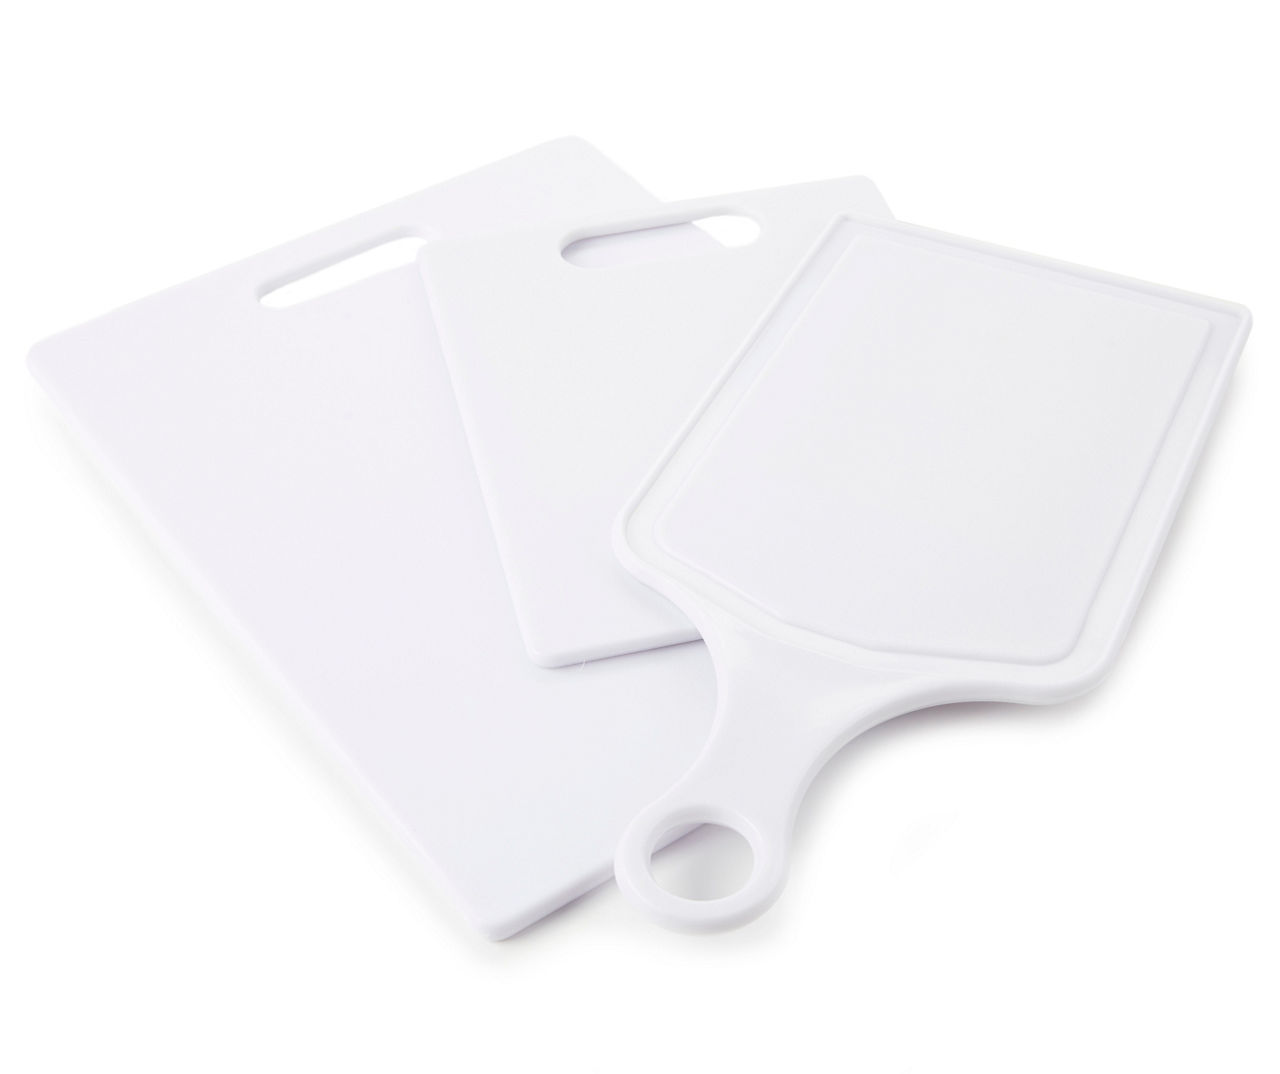 Preserve BPA-Free Cutting Board Set - Small (3 Pieces - 1 White, 1